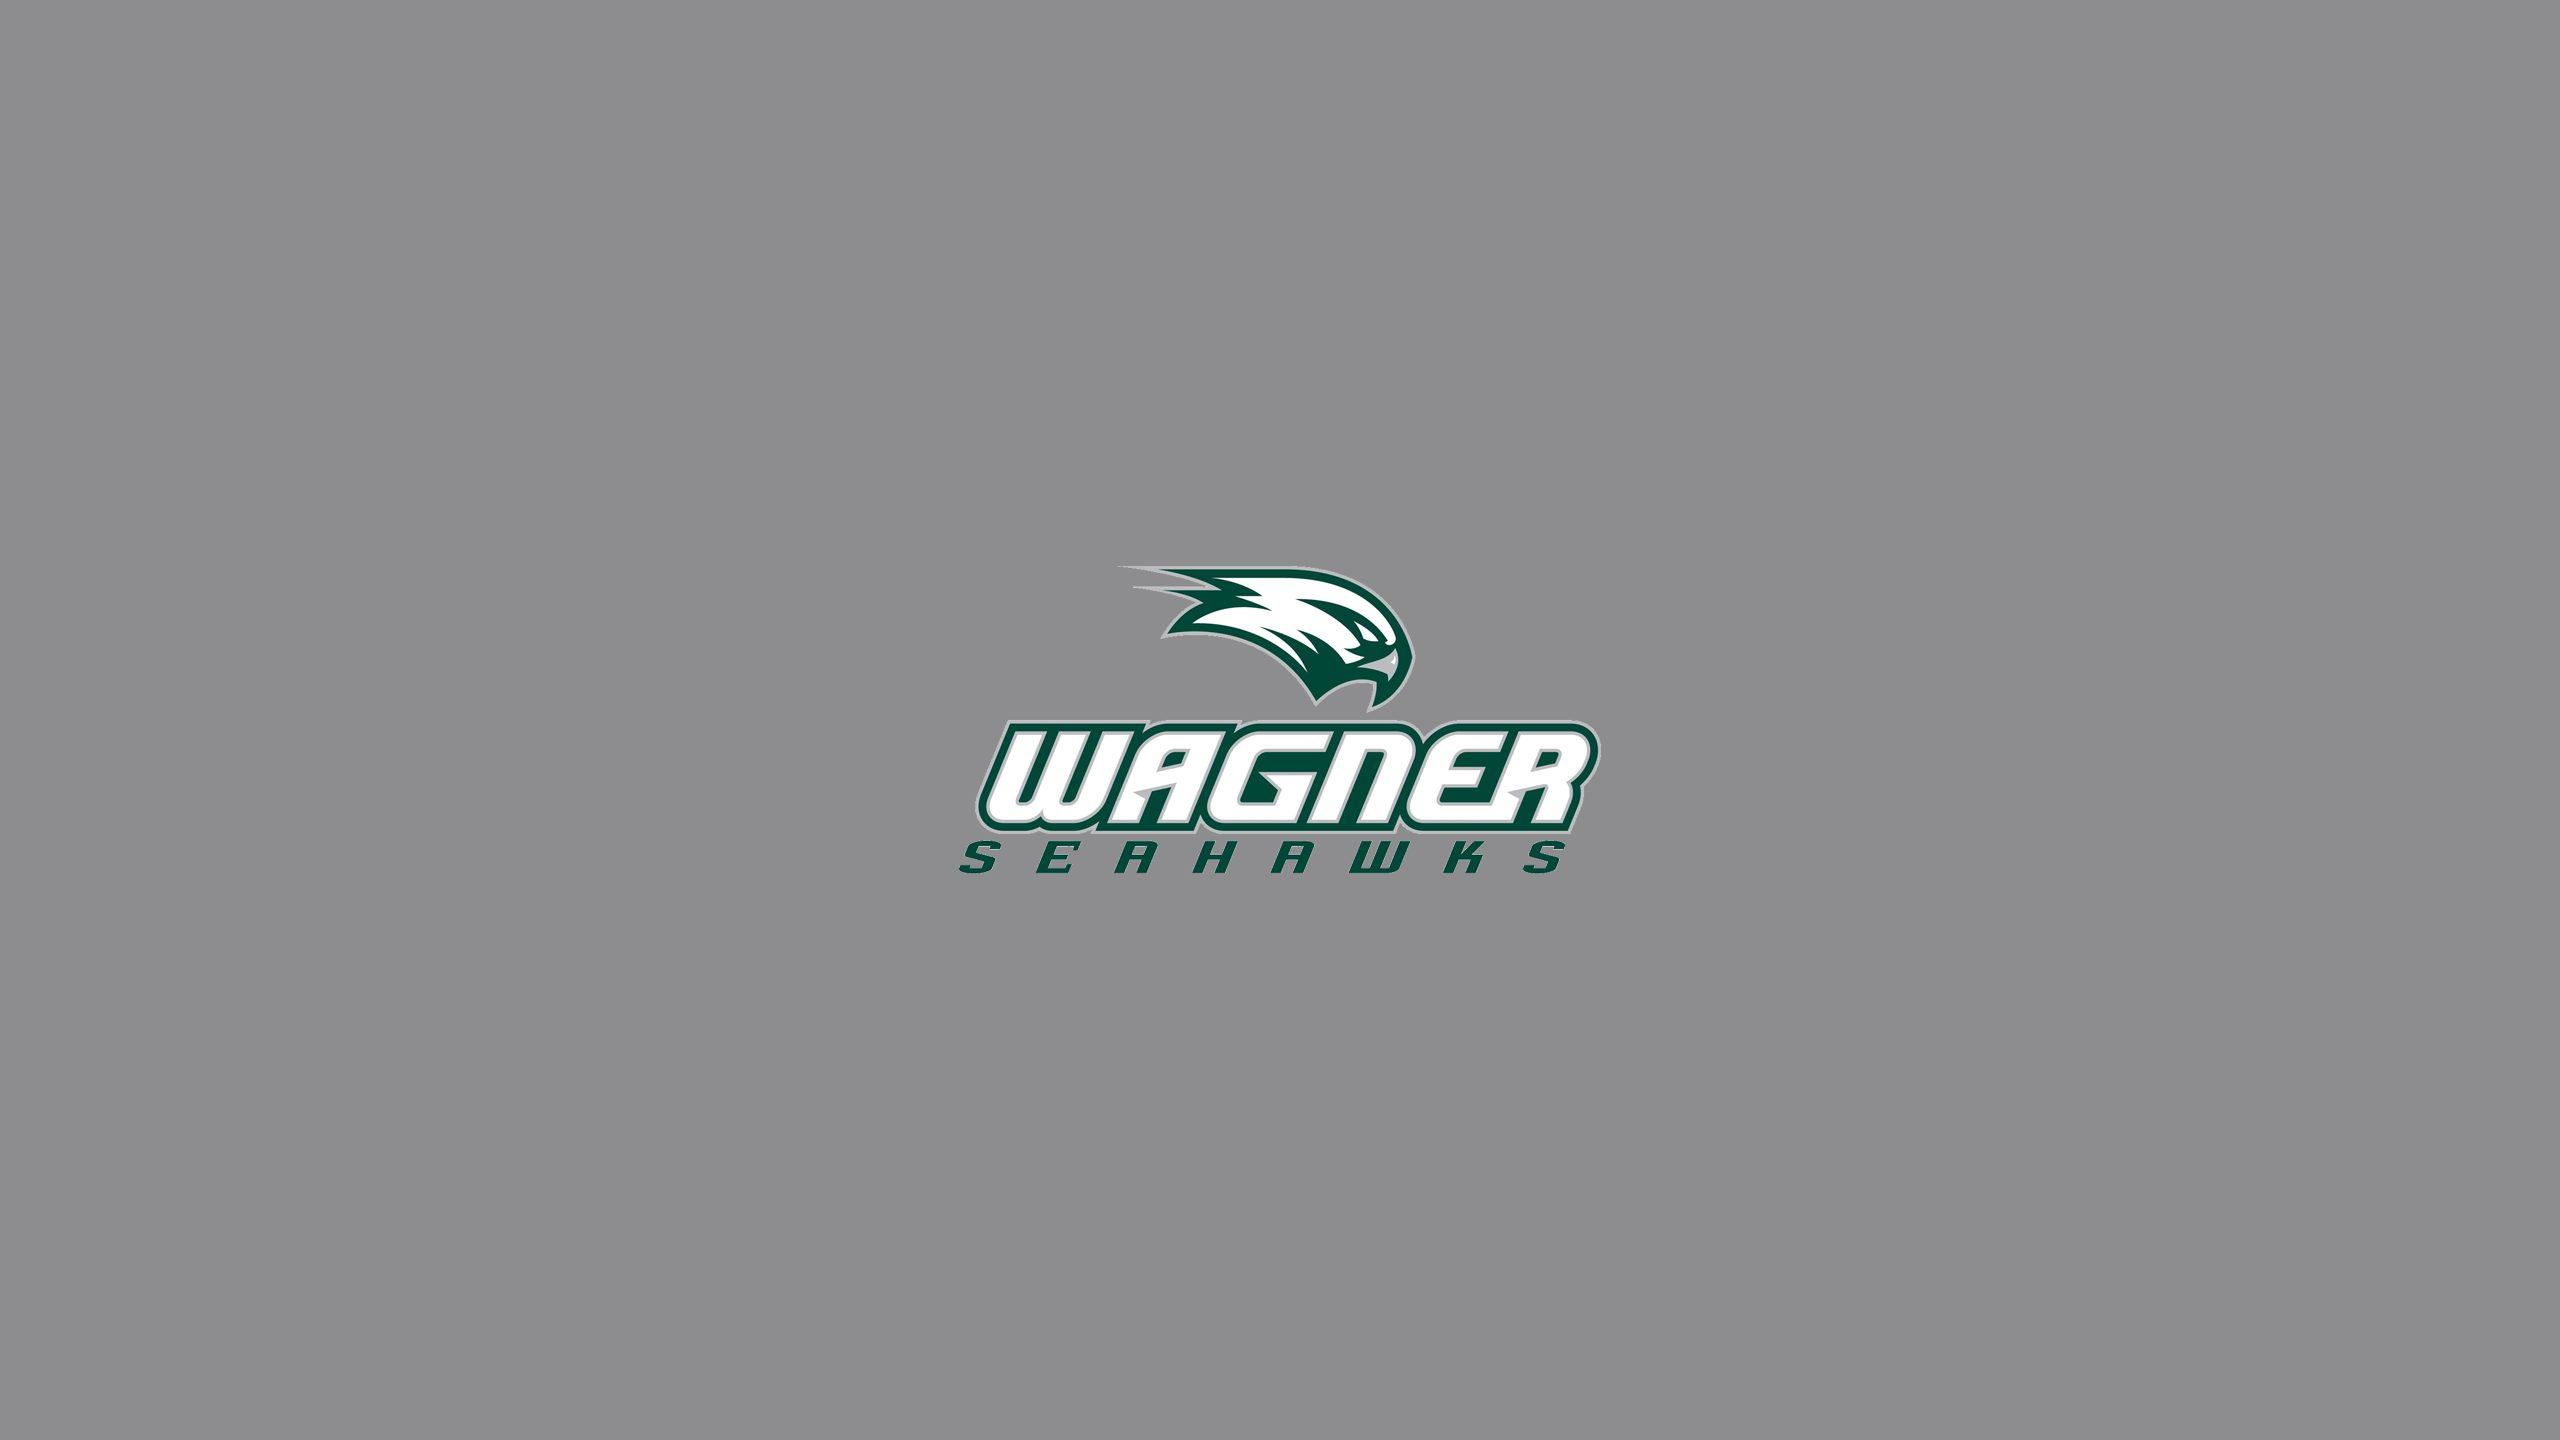 Wagner Seahawks Basketball - NCAAB - Square Bettor